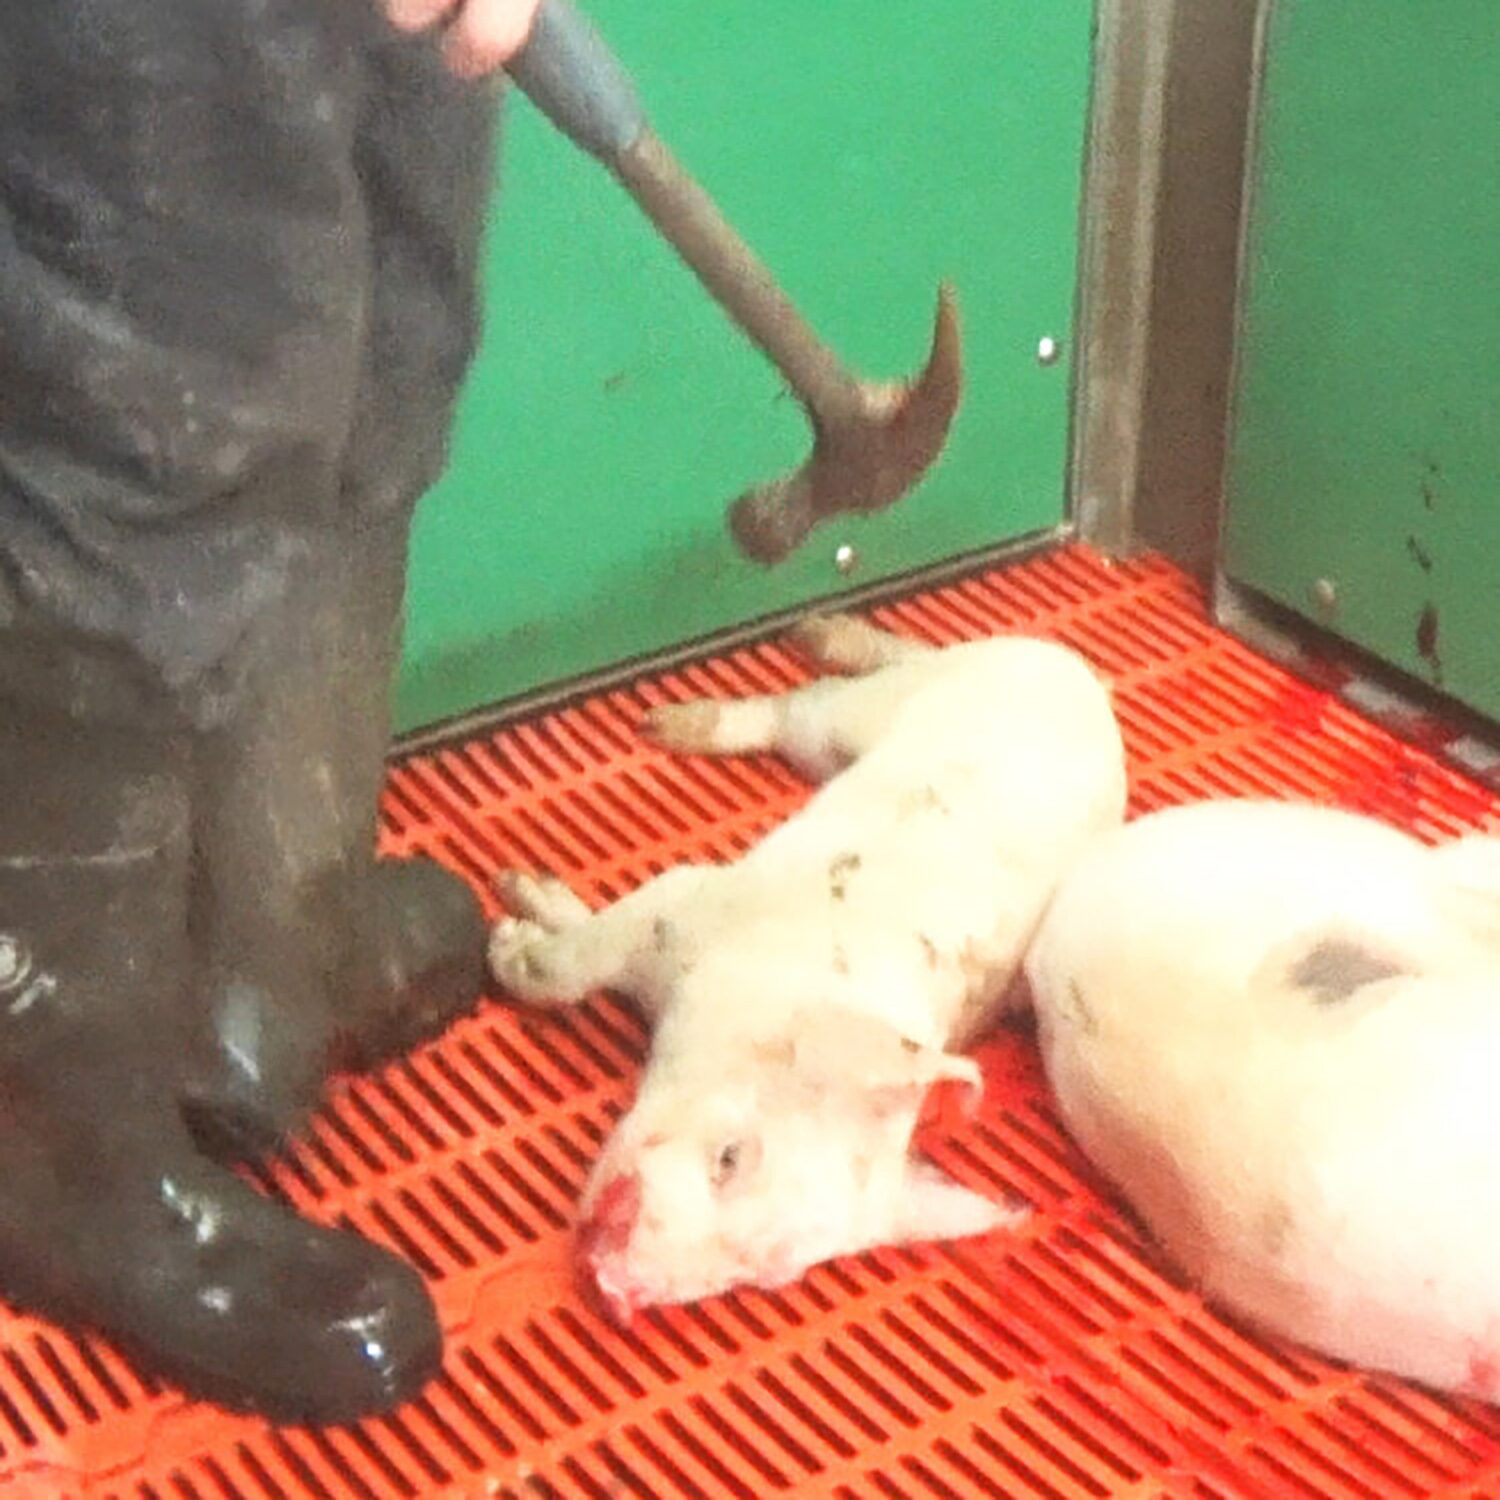 Two piglets lying on the floor, a farm worker holds a hammer over one.